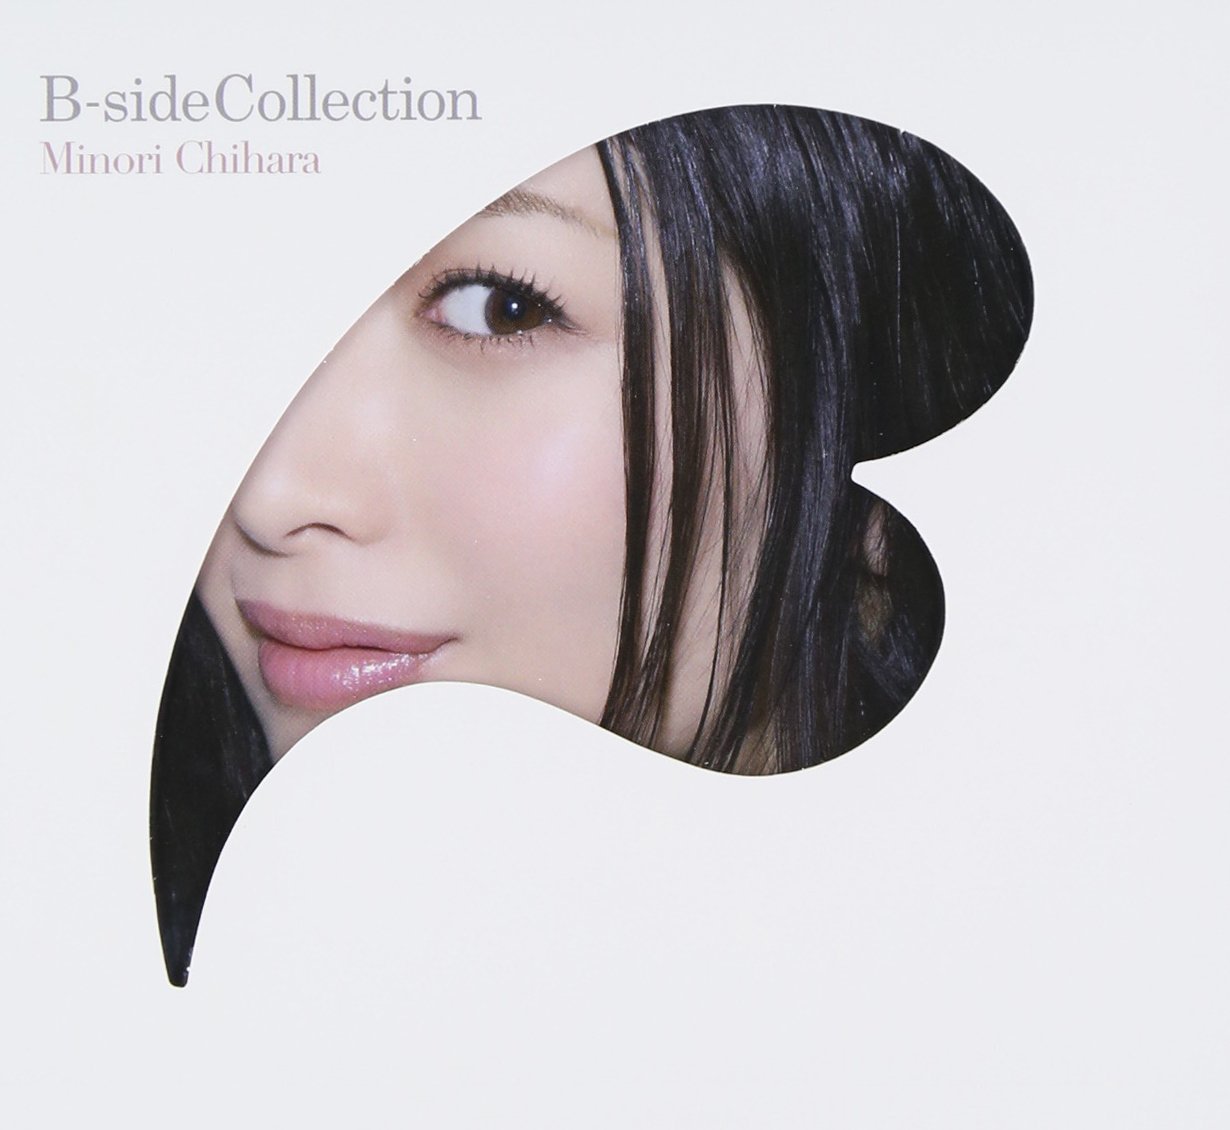 B-side collection